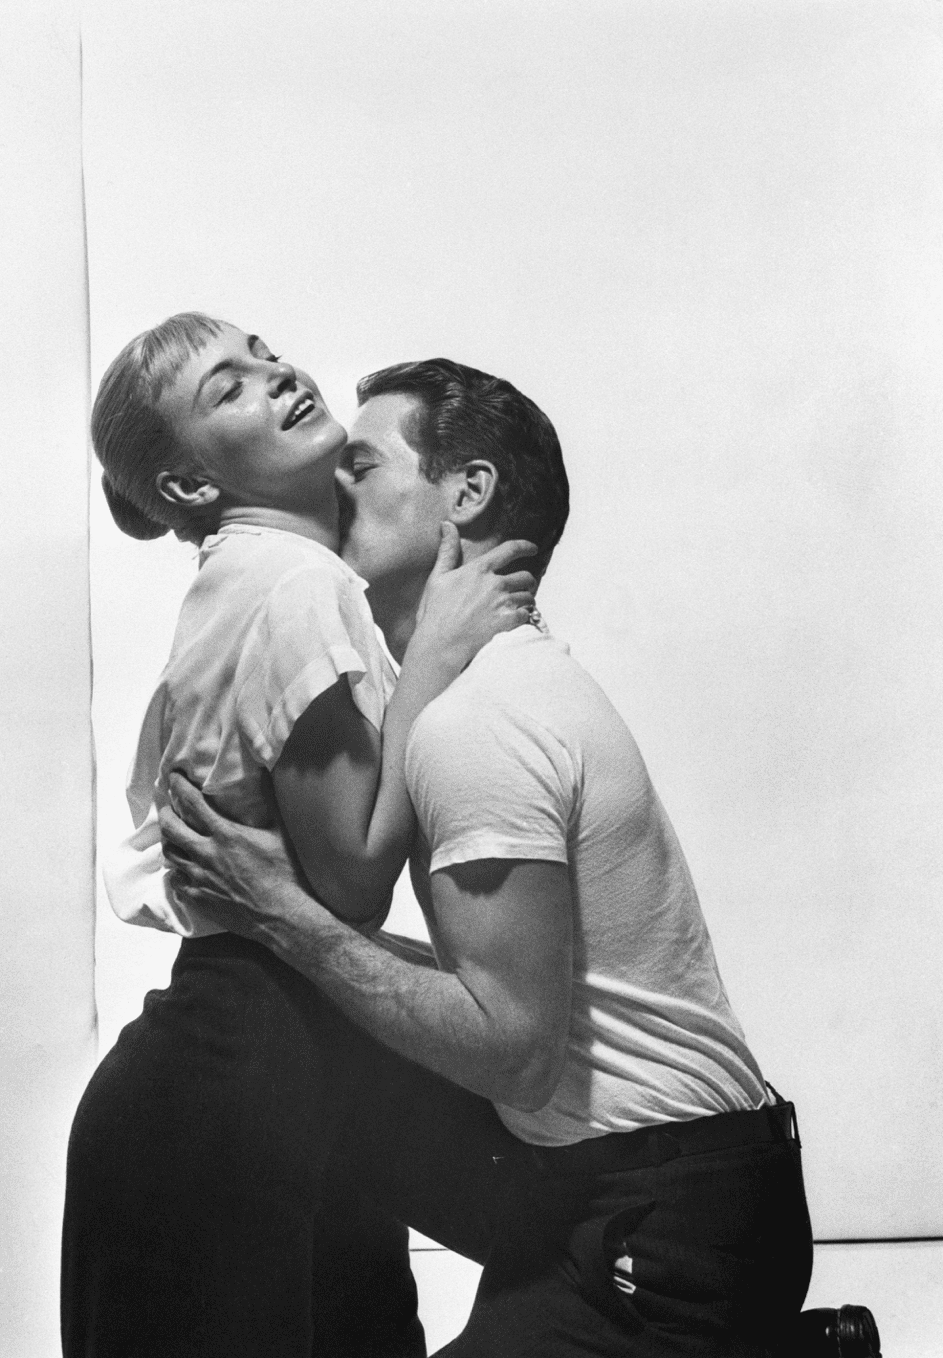 Paul Newman und Joanne Woodward in "The Long Hot Summer" 1958. | Quelle: Getty Images